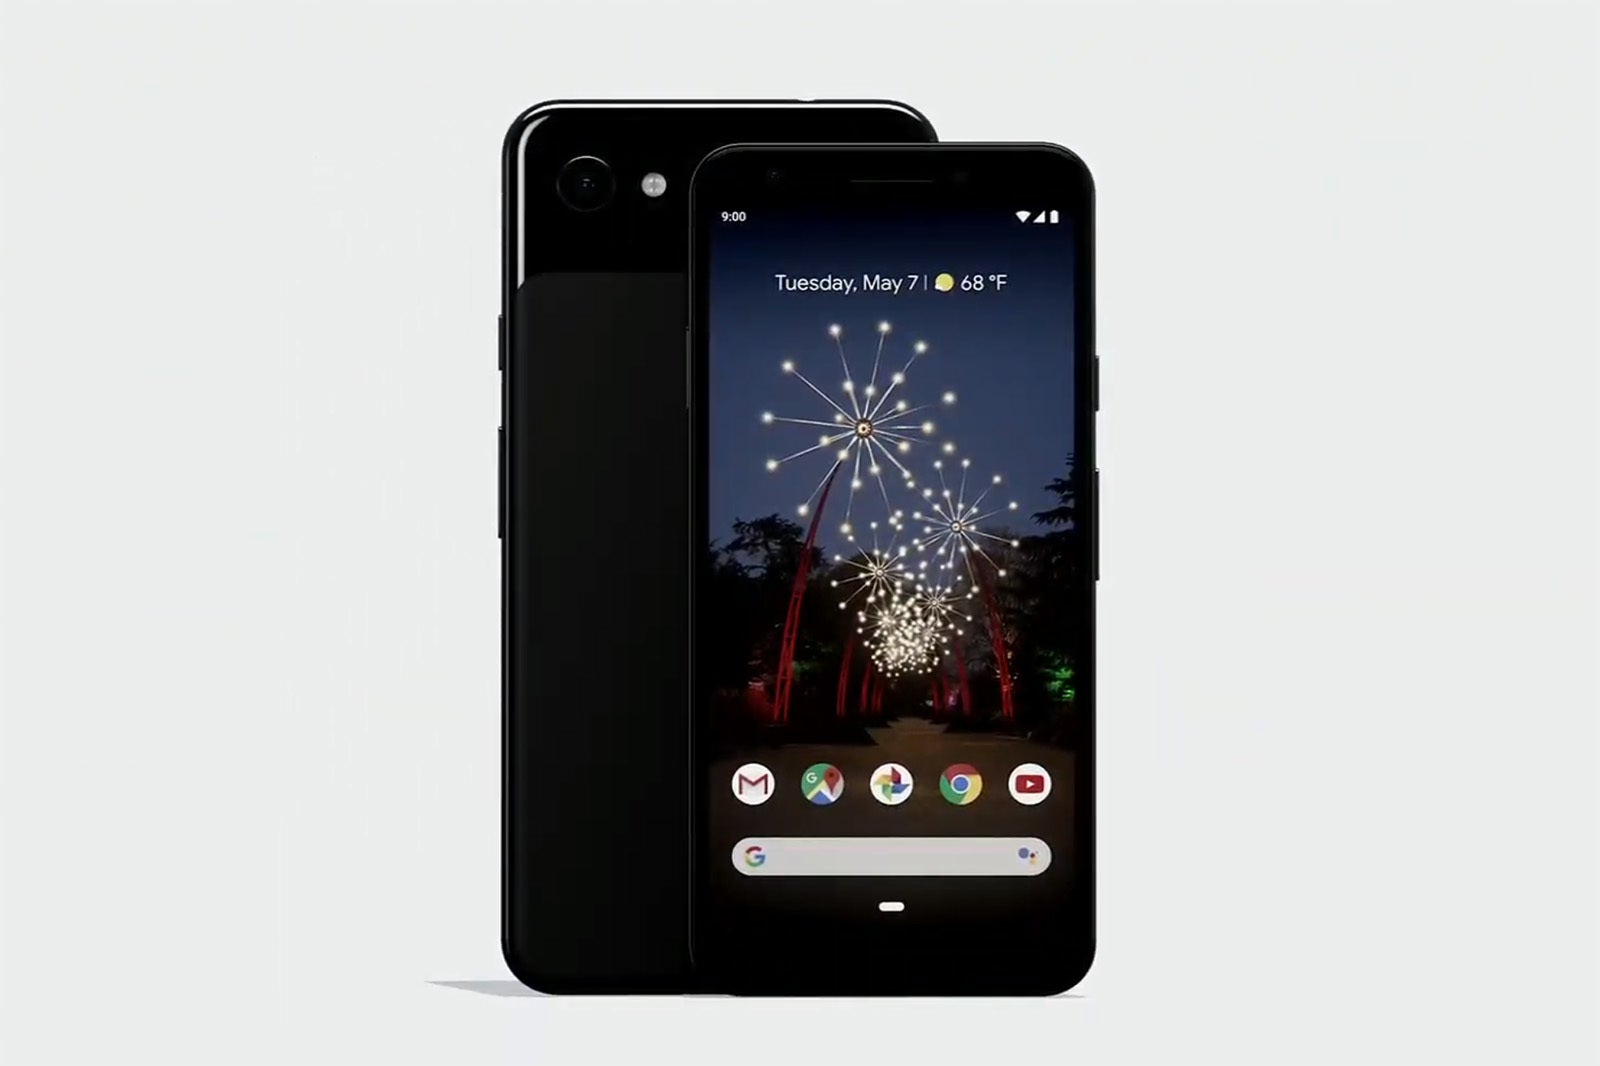 Google Pixel 3a and Pixel 3a XL are now finally official: here's all you need to know